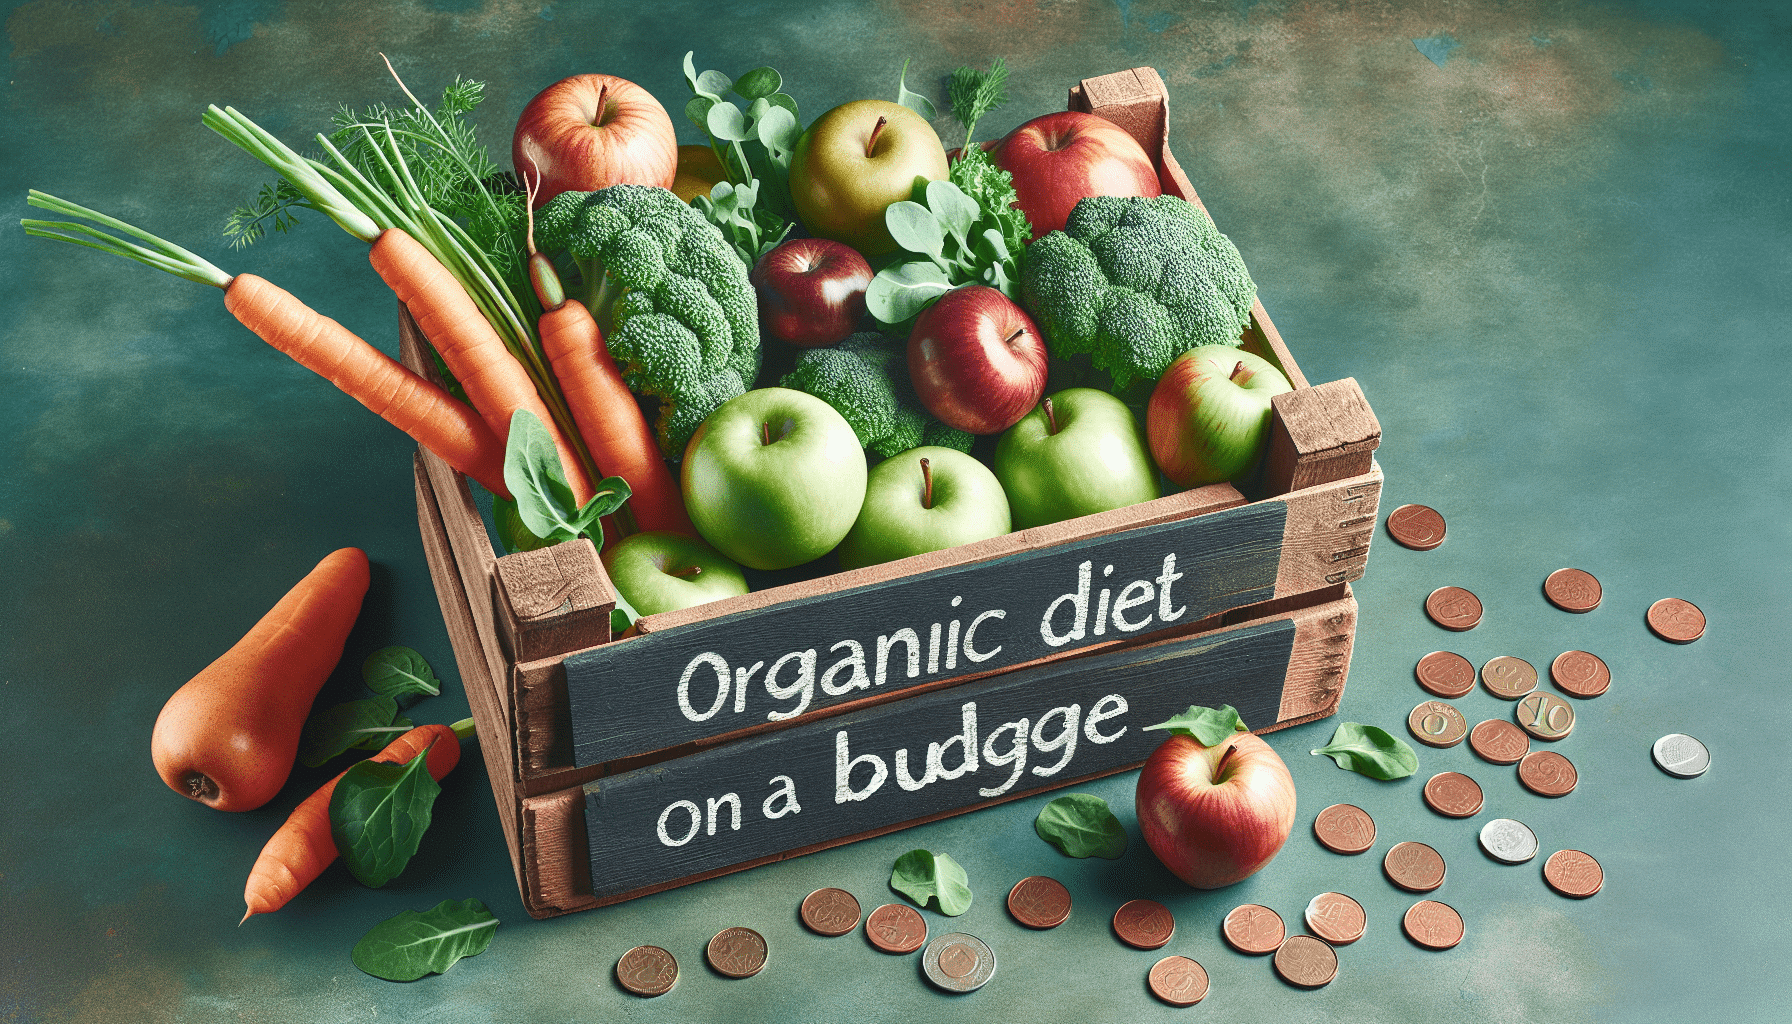 Tips For Organic Eating On A Budget